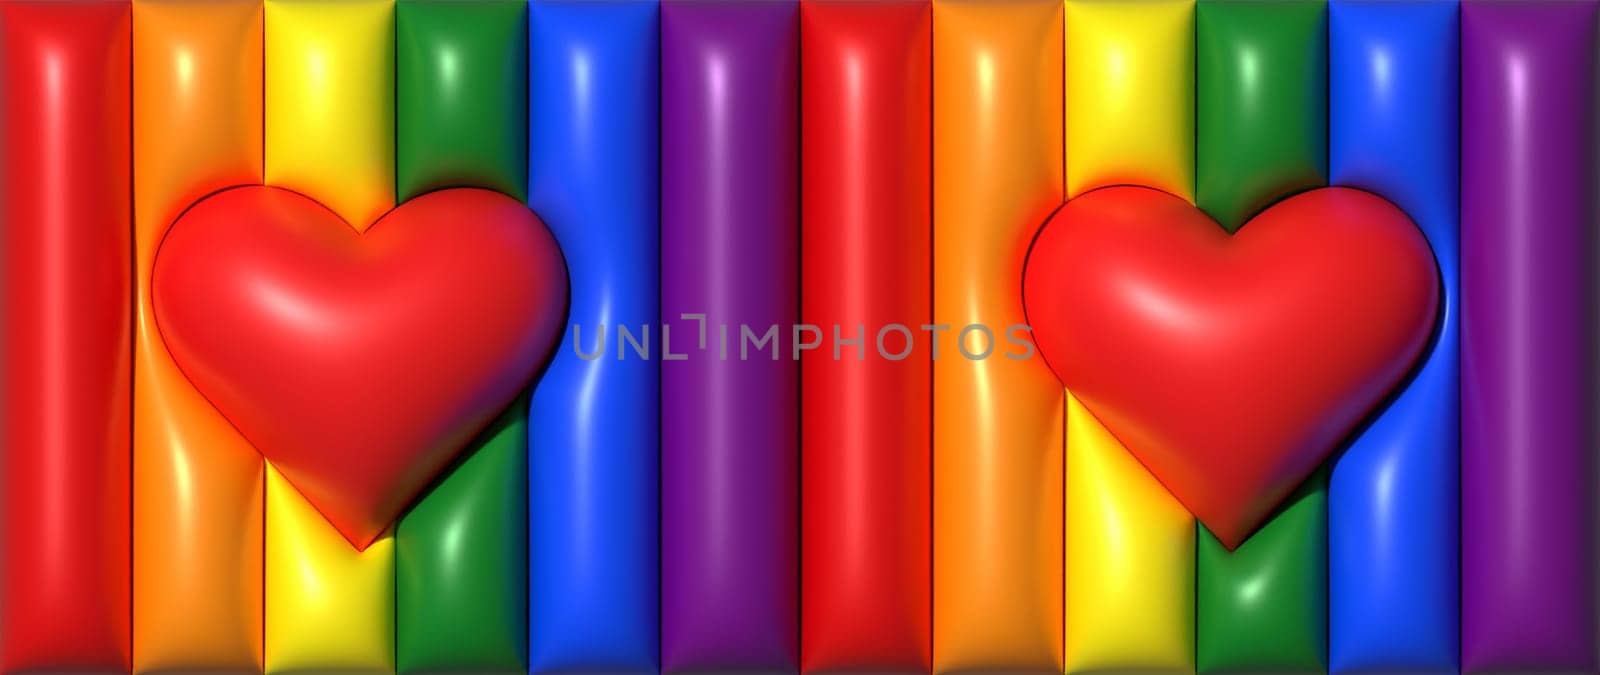 The multi-colored flag is a symbol of LGBT social movements, reflecting the diversity of the LGBT community and the spectrum of human sexuality and gender. 3D rendering illustration